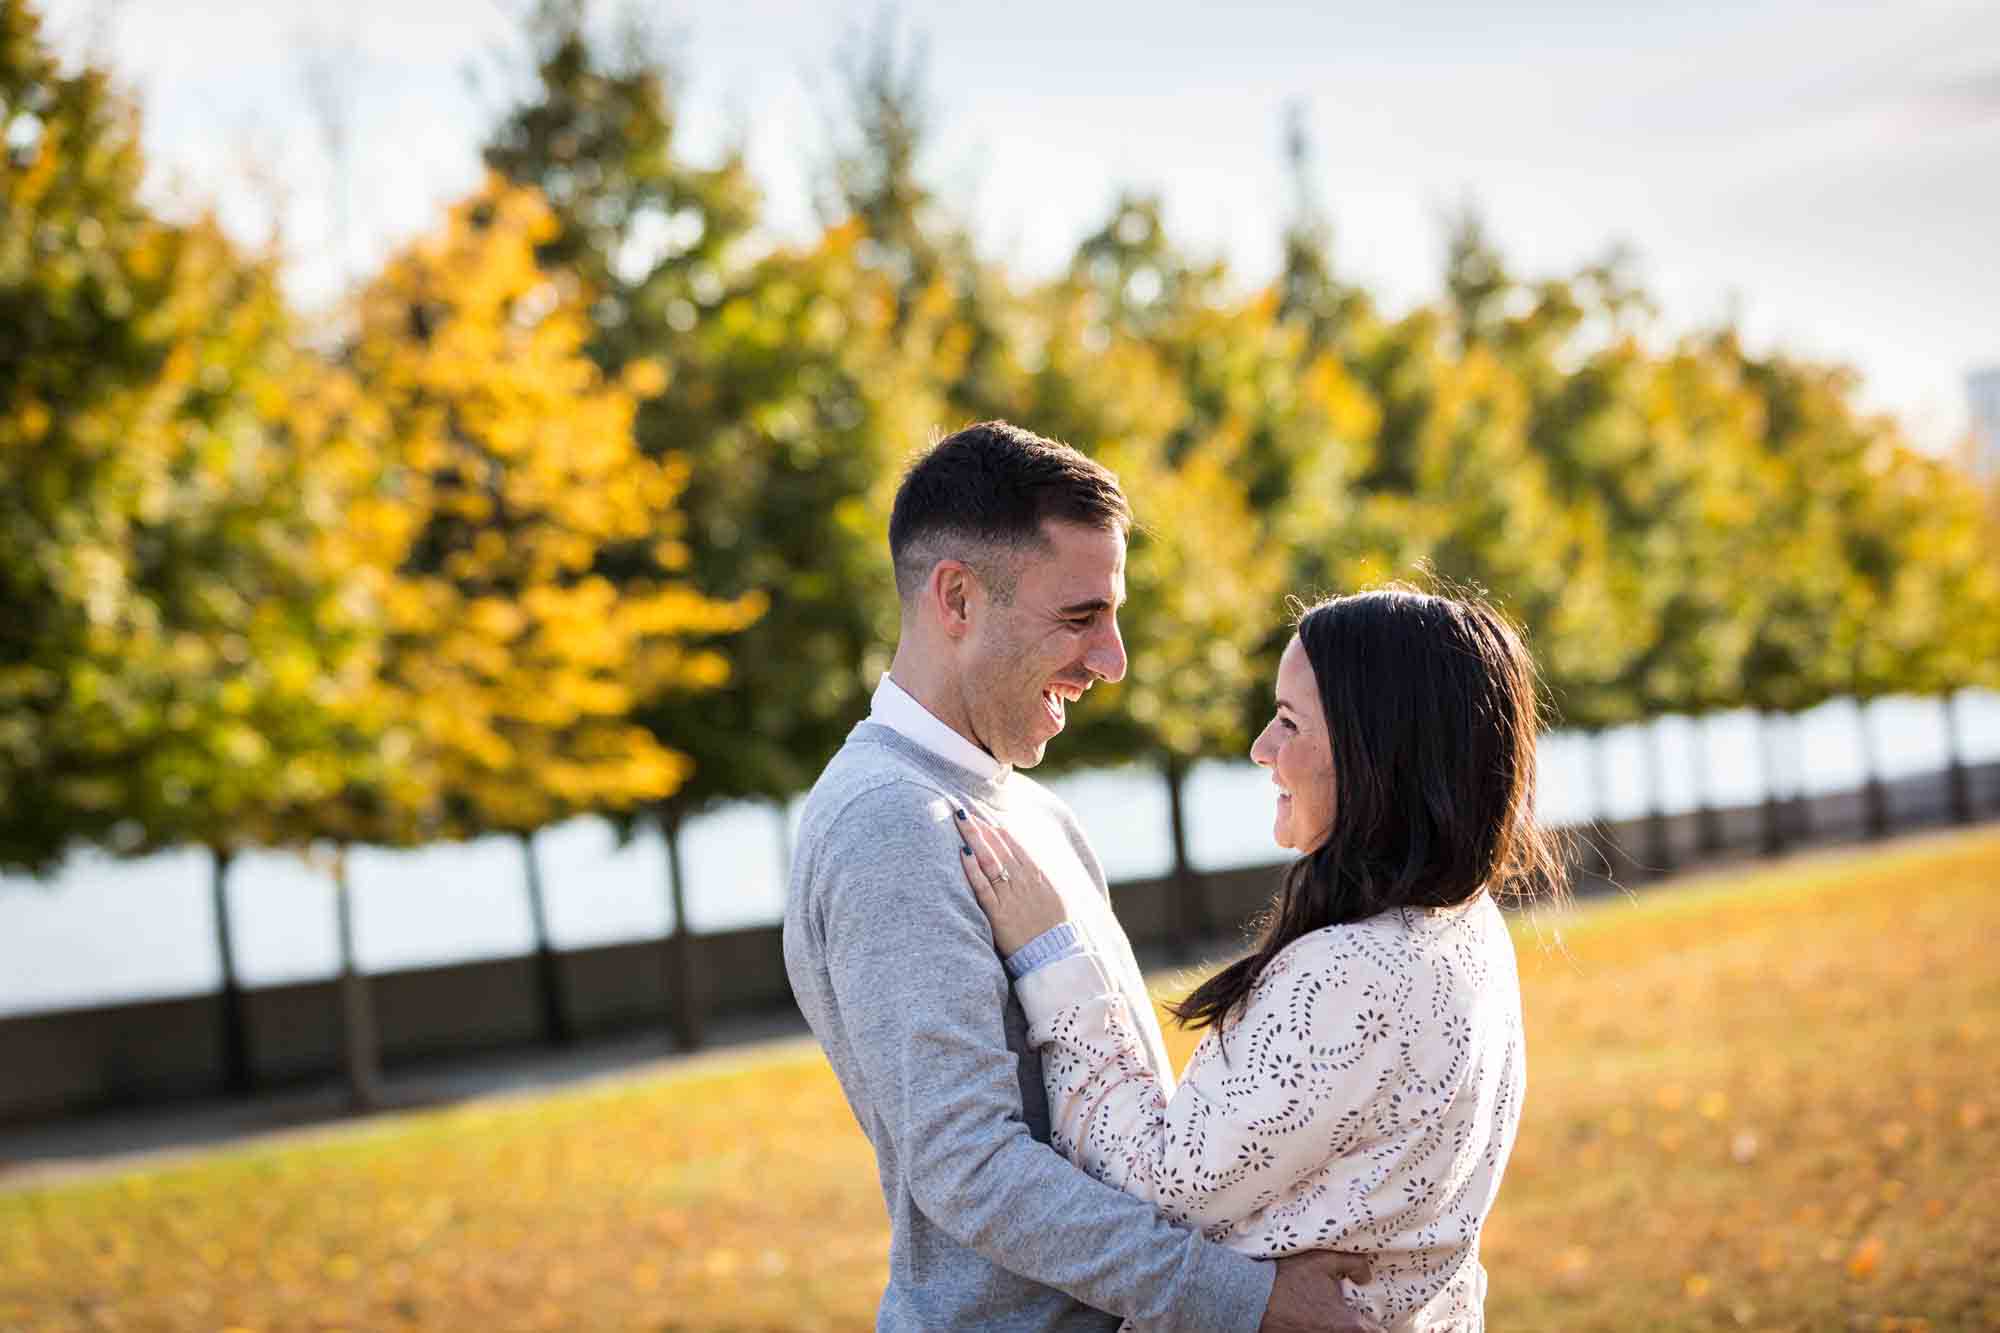 Woman with hands on man's chest in front of trees during a Roosevelt Island engagement photo shoot